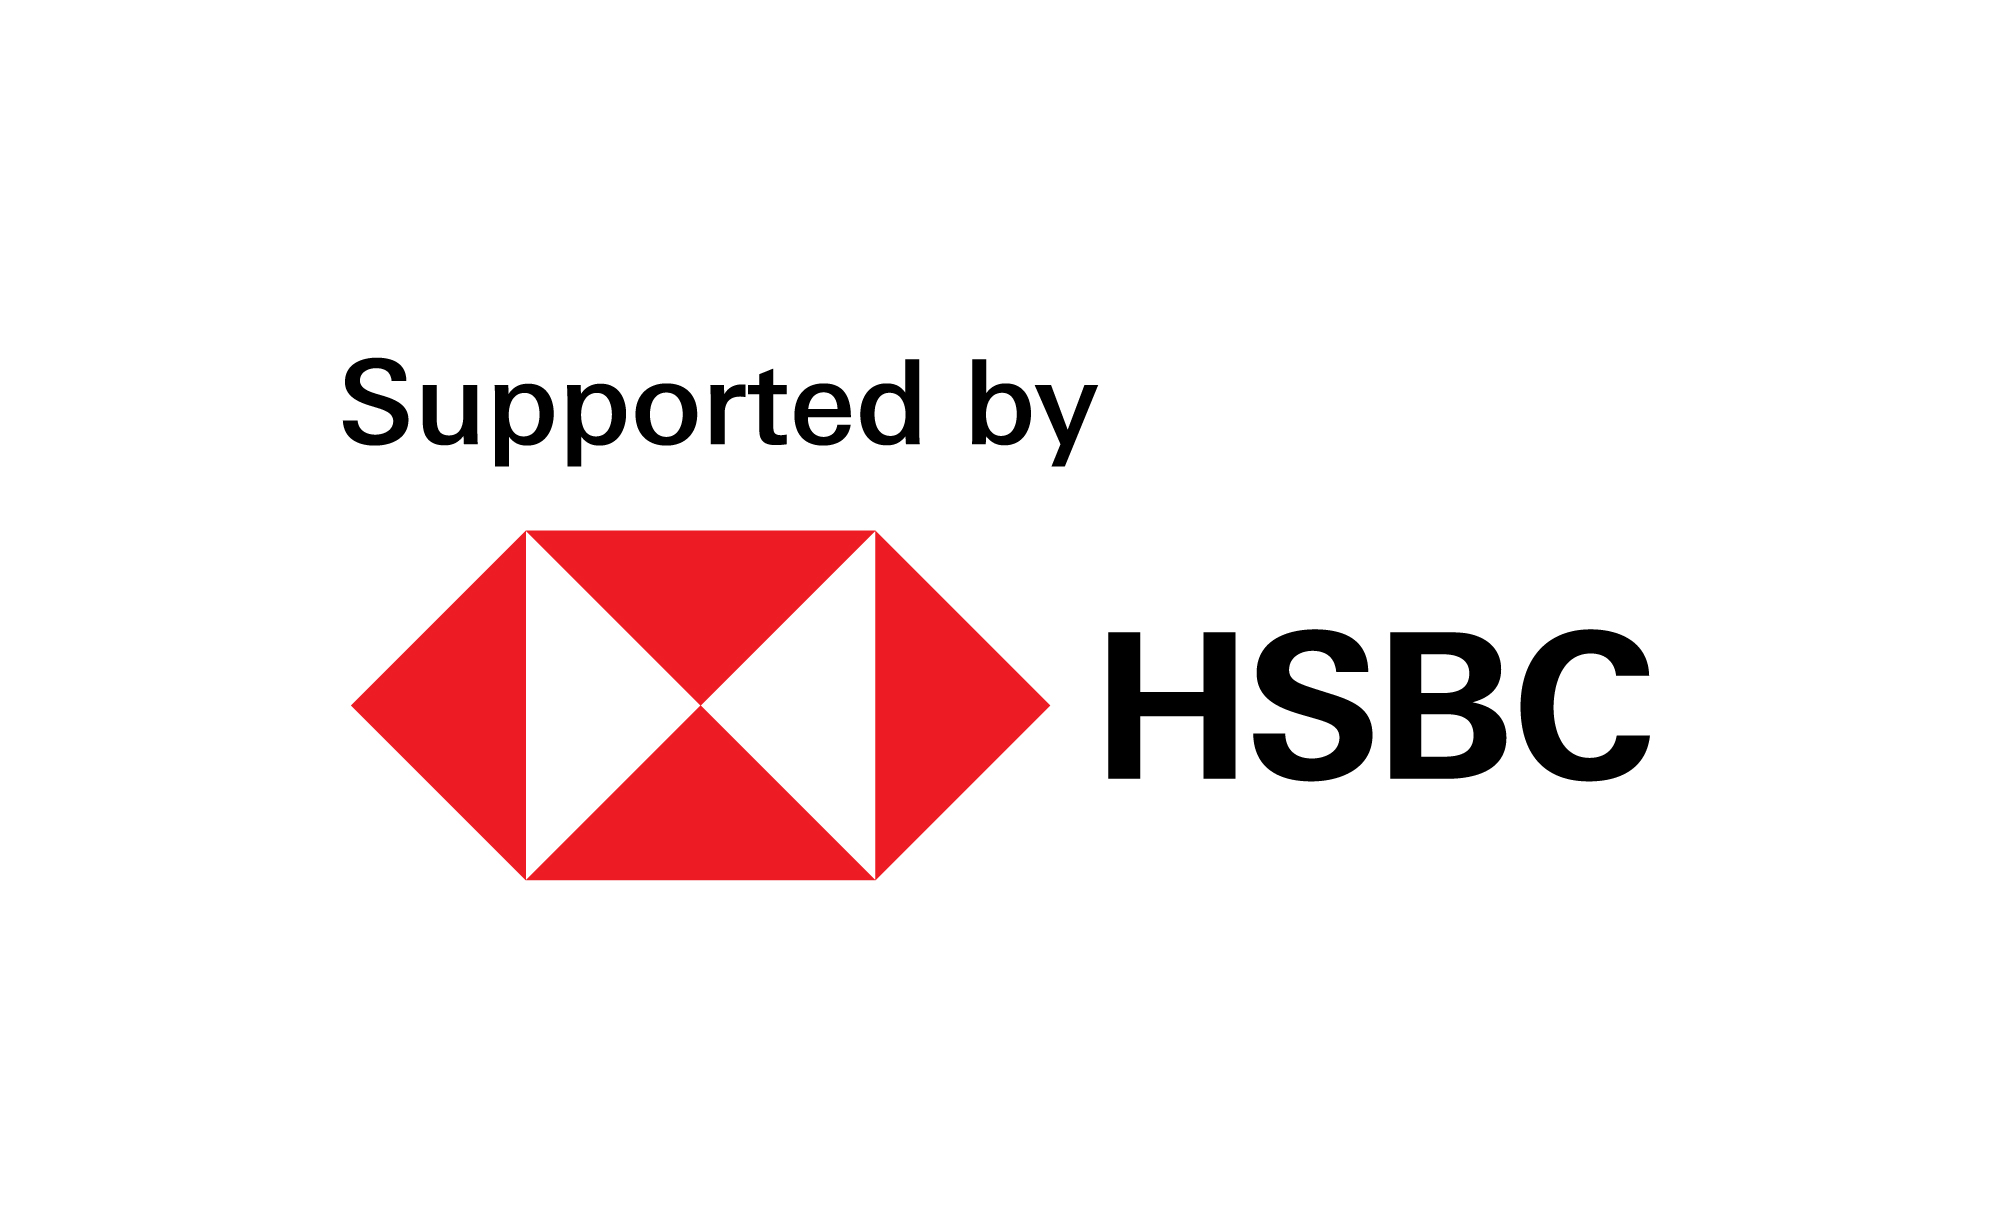 HSBC_Supported-by_CMYK